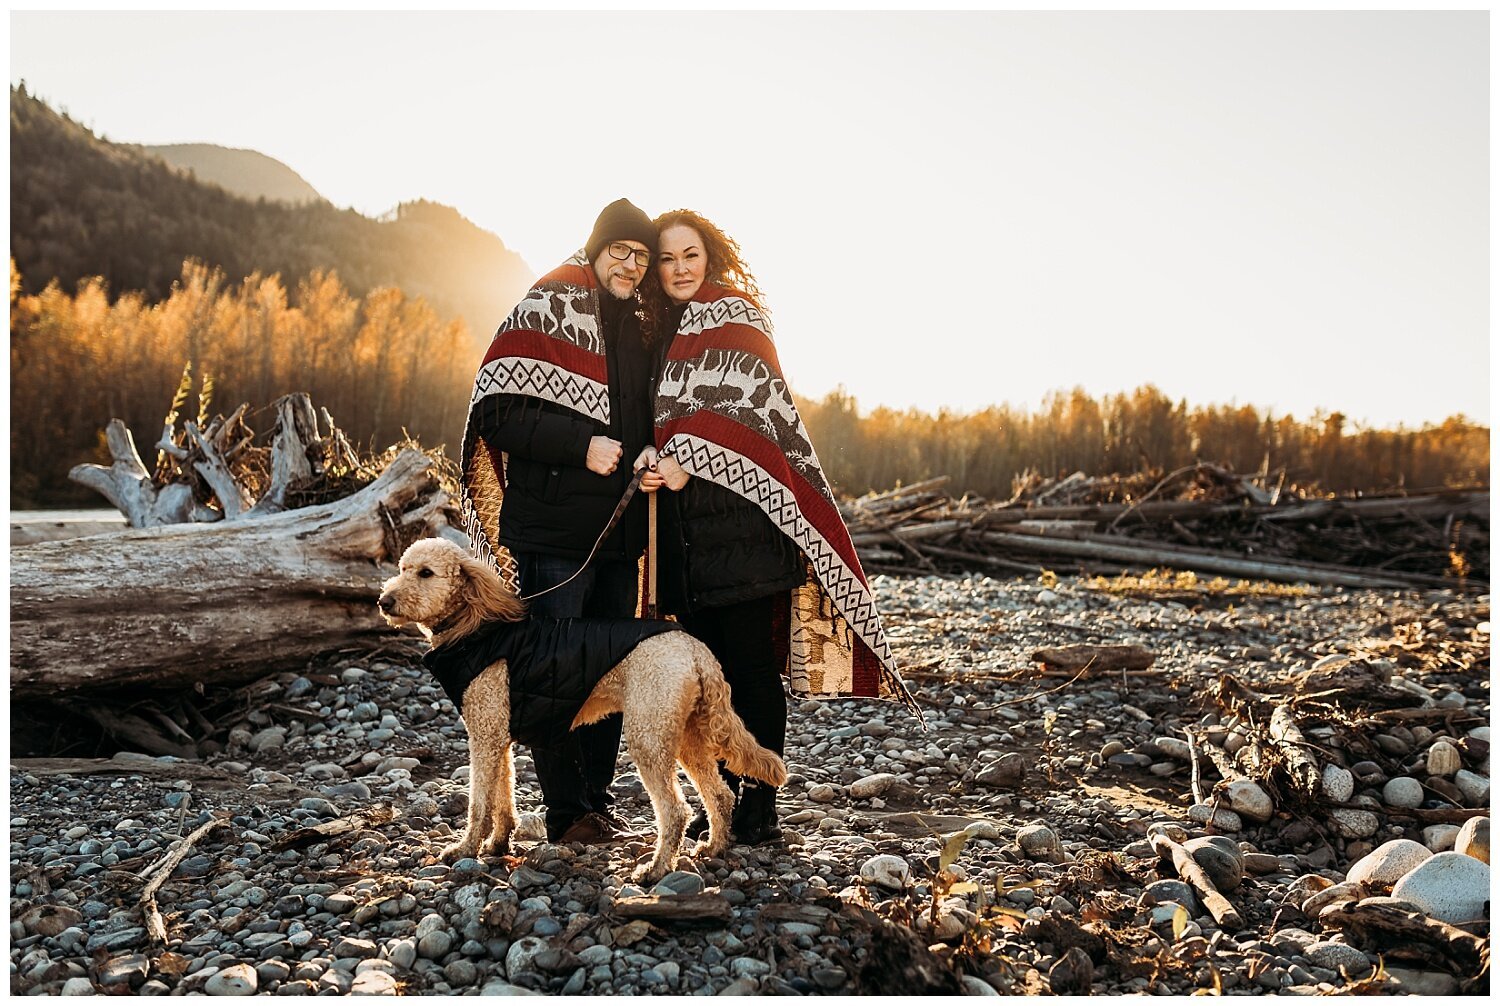 Vedder+River+Couples+-+Anna+Hurley+Photography+-+Chilliwack,+BC+16.jpg